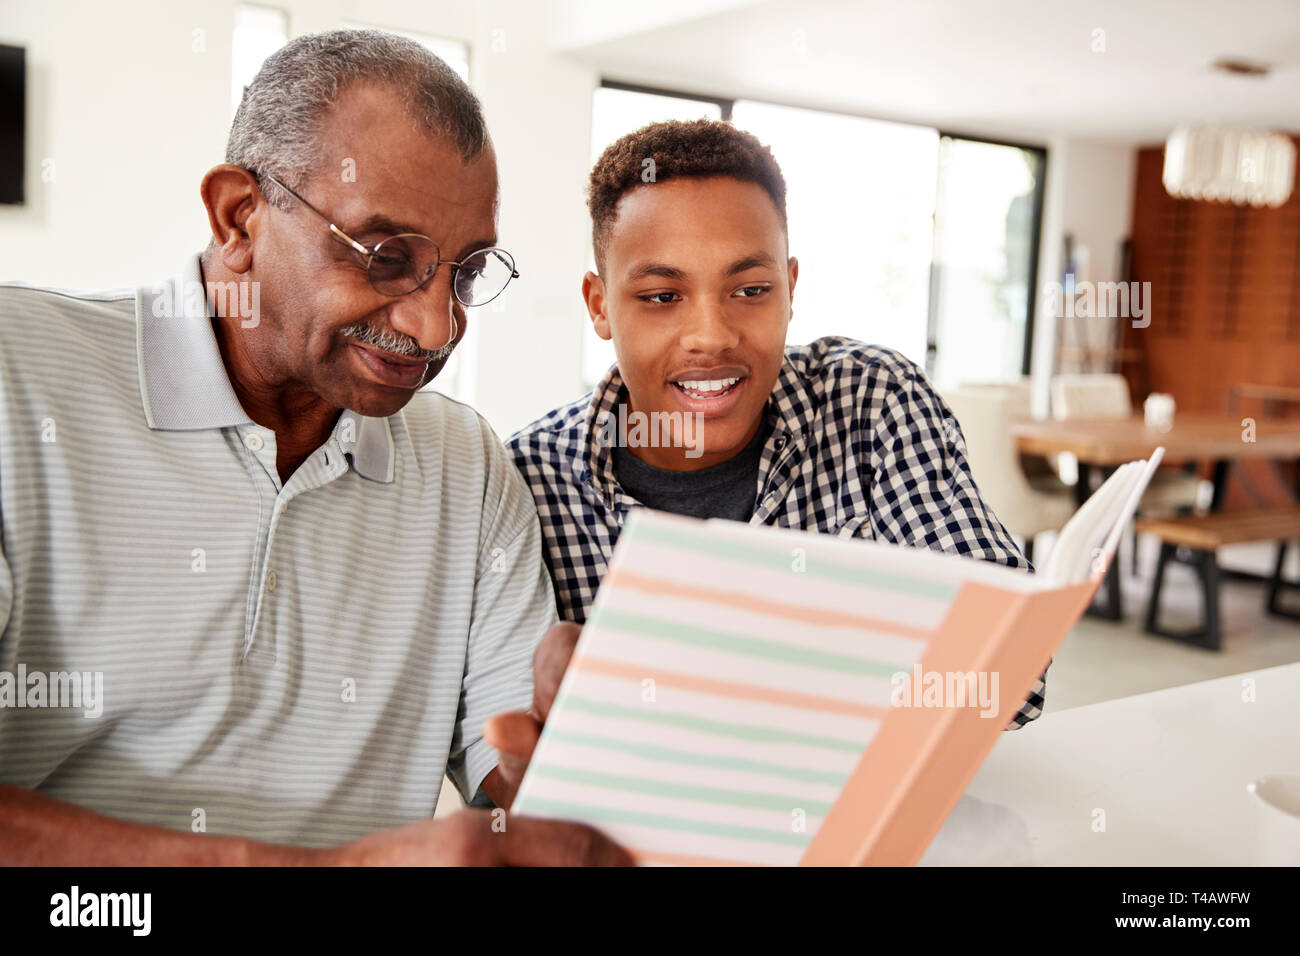 Young black man looking at a photo album at home with his grandfather, close up Stock Photo